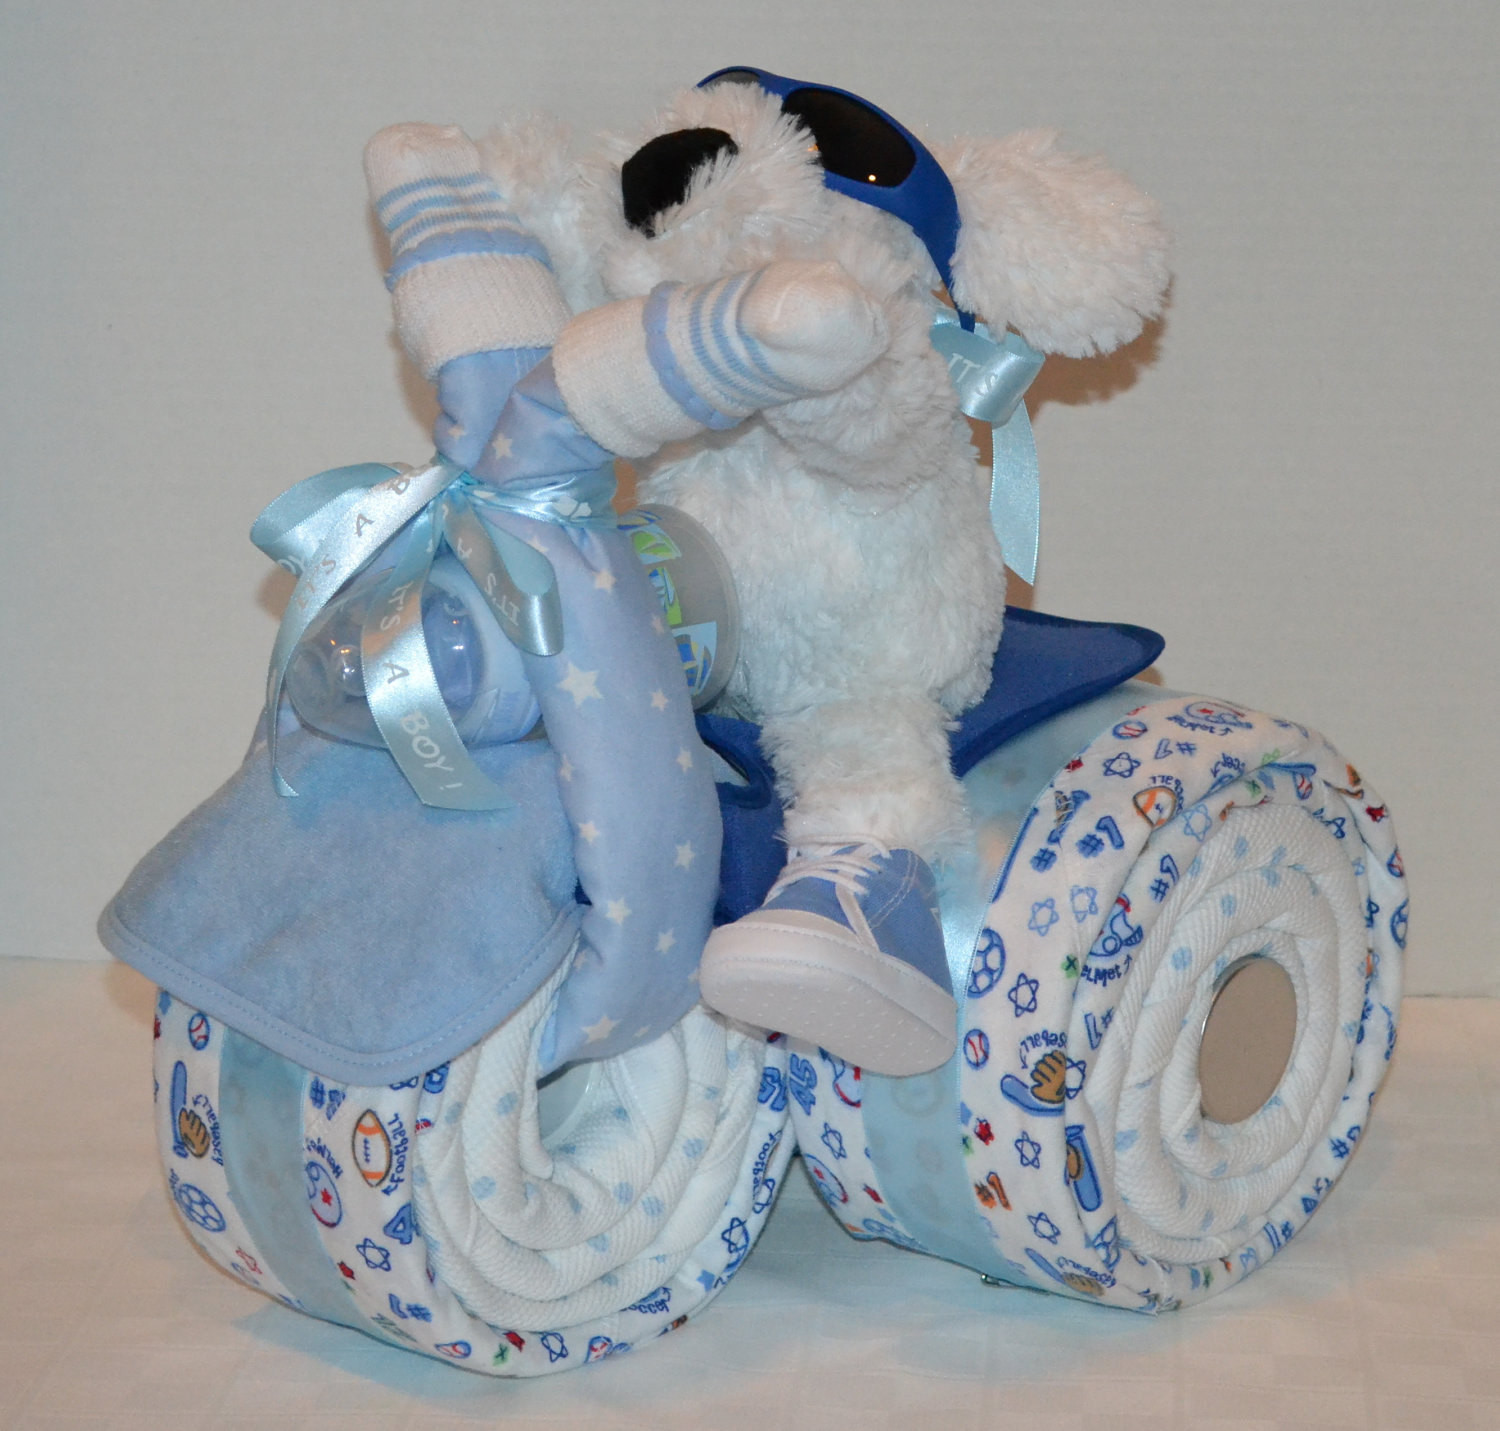 Gift Ideas For Baby Boys
 Tricycle Trike Diaper Cake Baby Shower Gift Sports theme